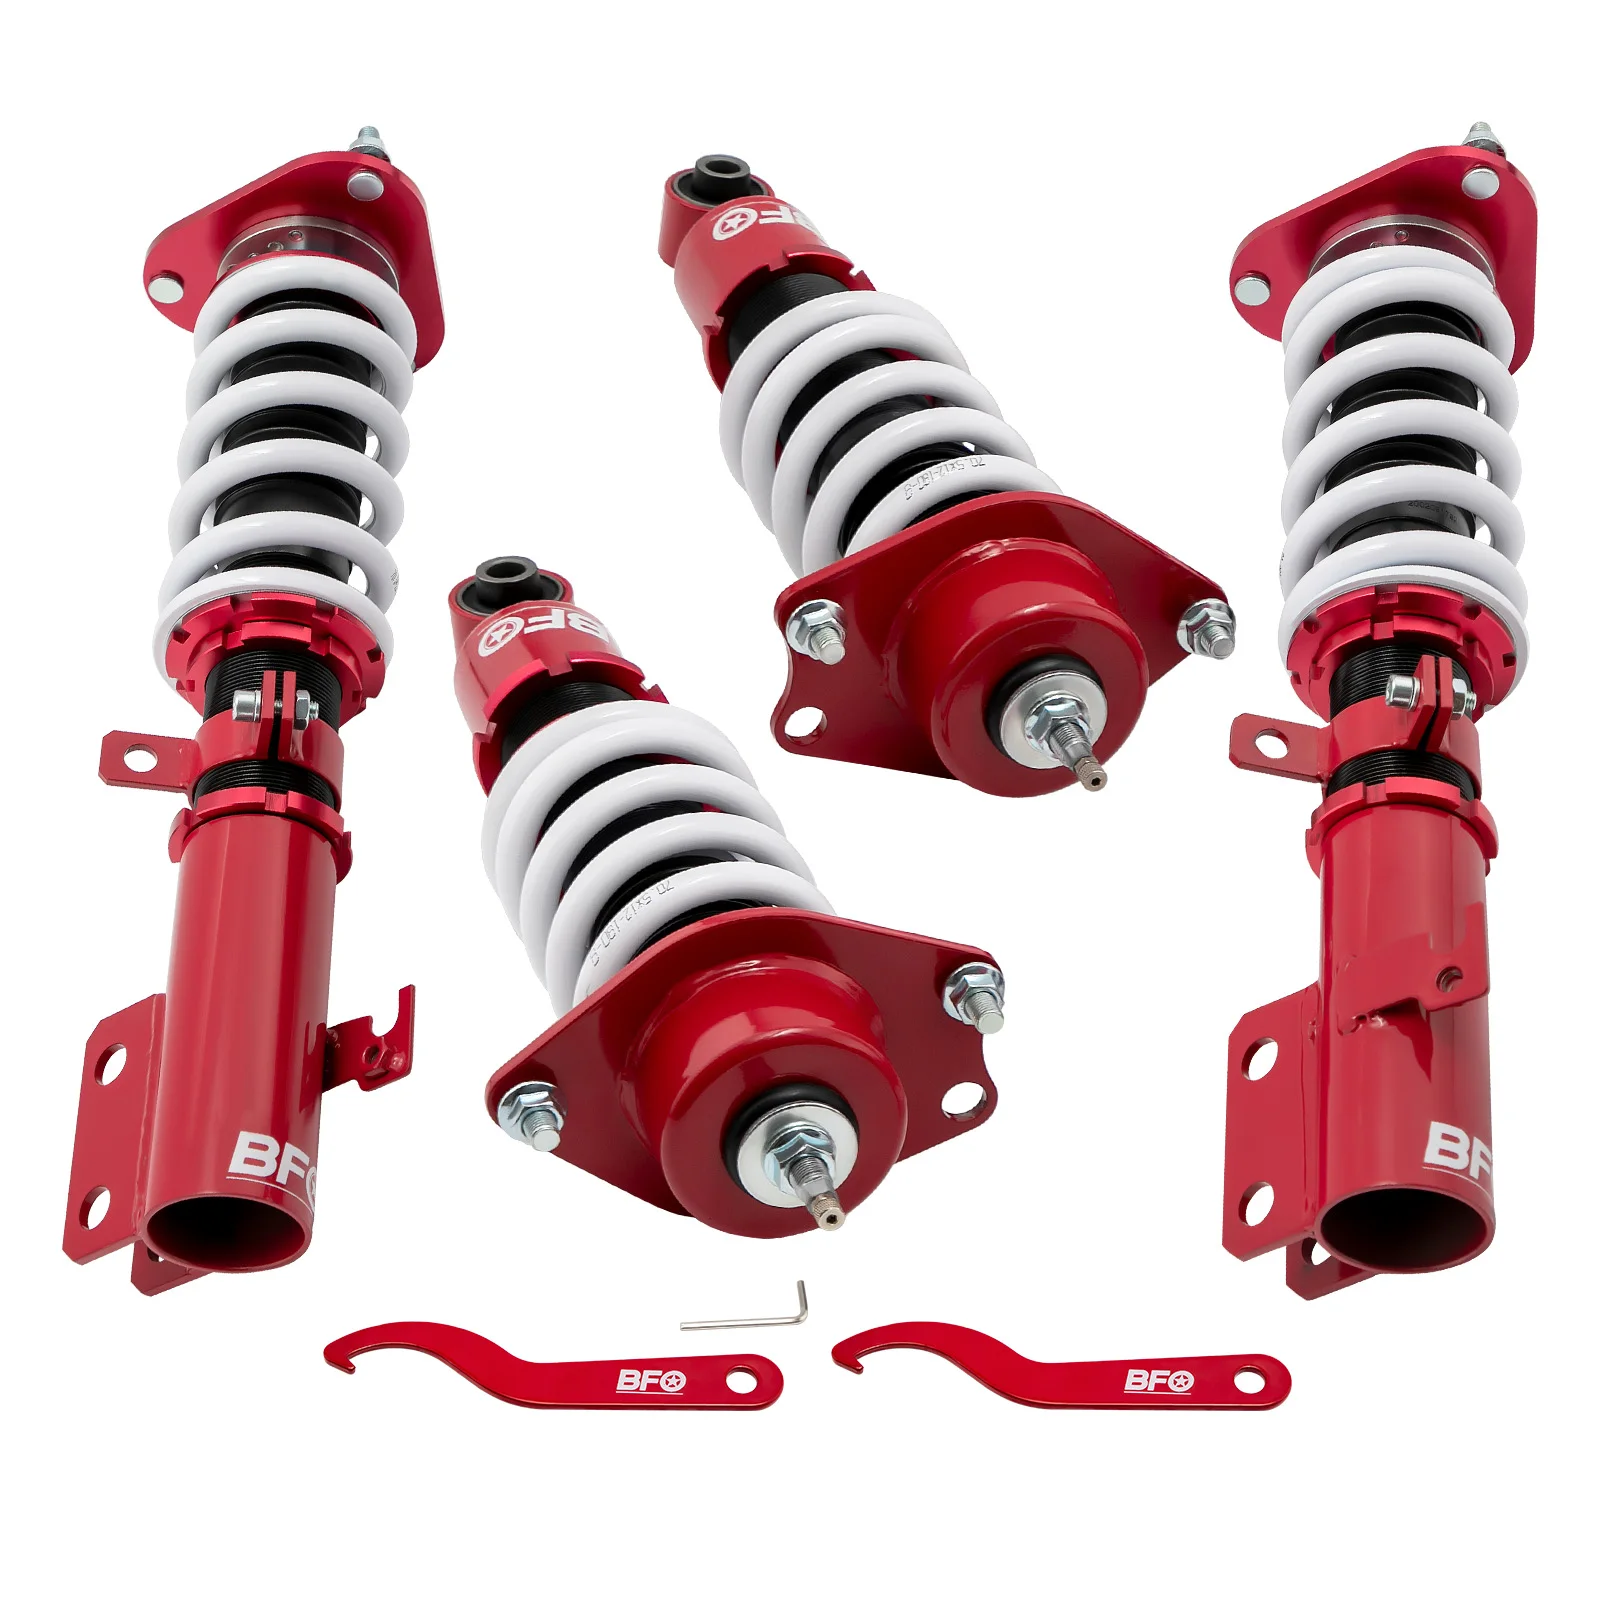 

Racing Coilovers Kit For Toyota Celica 2000-2006 Adjustable Height Shock Struts Absorber Spring Coil Spring Coilover